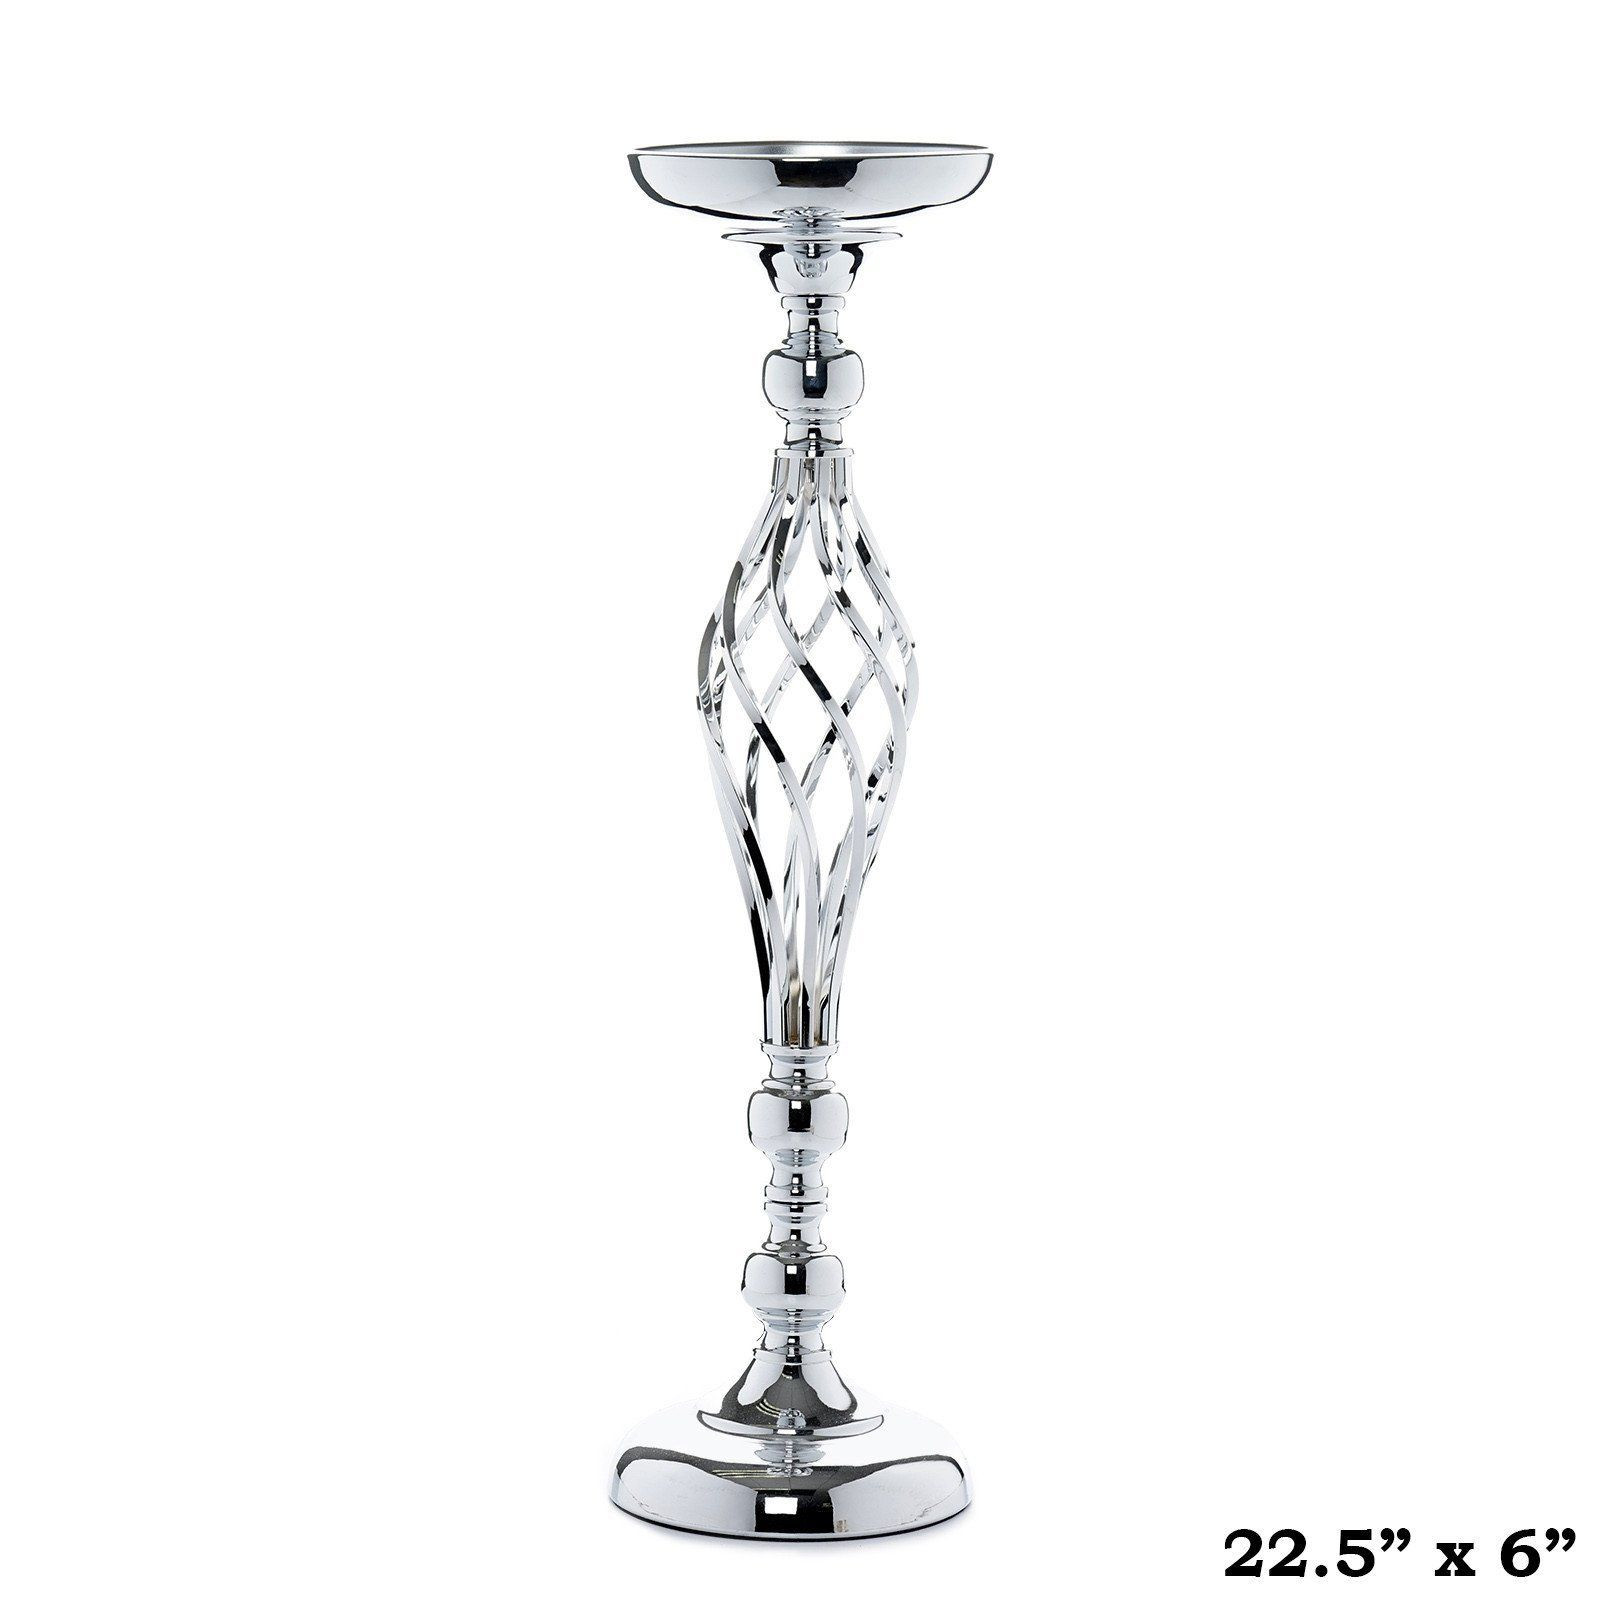 16 Stunning Tall Vases for Sale Cheap 2024 free download tall vases for sale cheap of 22 5 tall metal flower decor candle holder vase buy 1 get 1 free with 22 5 tall metal flower decor candle holder vase buy 1 get 1 free silver